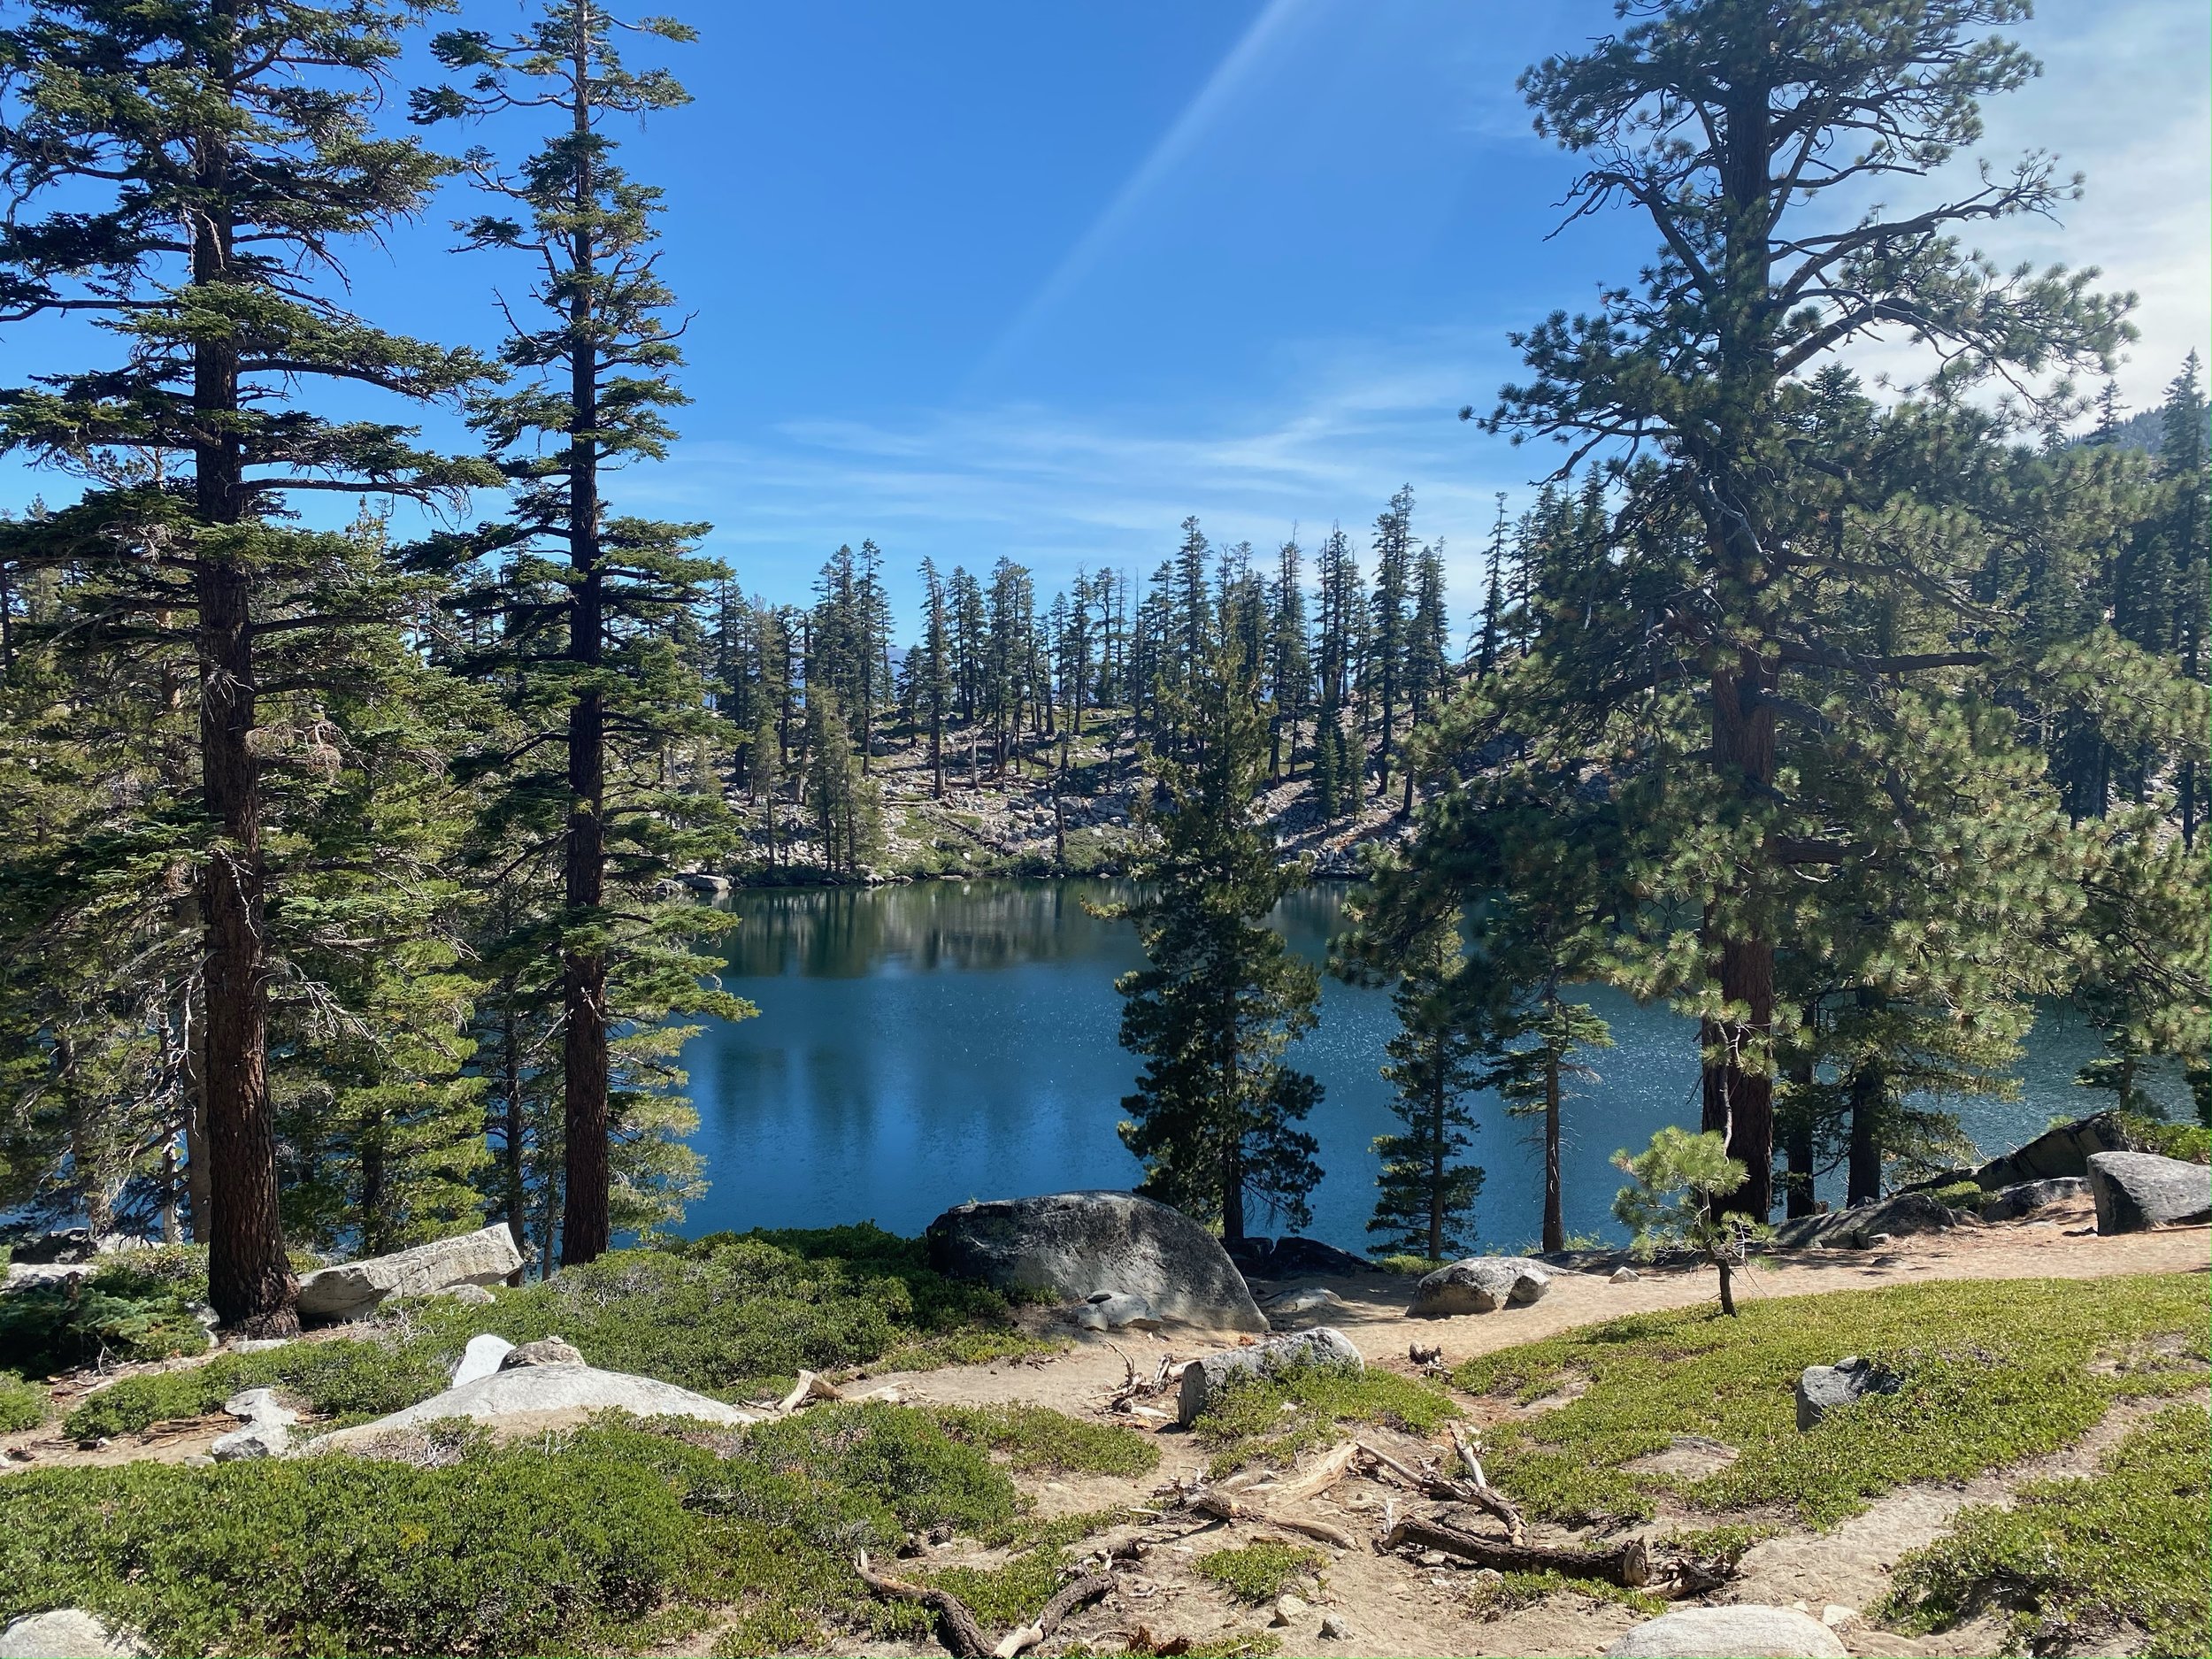  Walking or hiking in nature are some of my favorite ways of decompressing and reconnecting with my family. This photo was hiking to Maggie’s Peak at Lake Tahoe. 